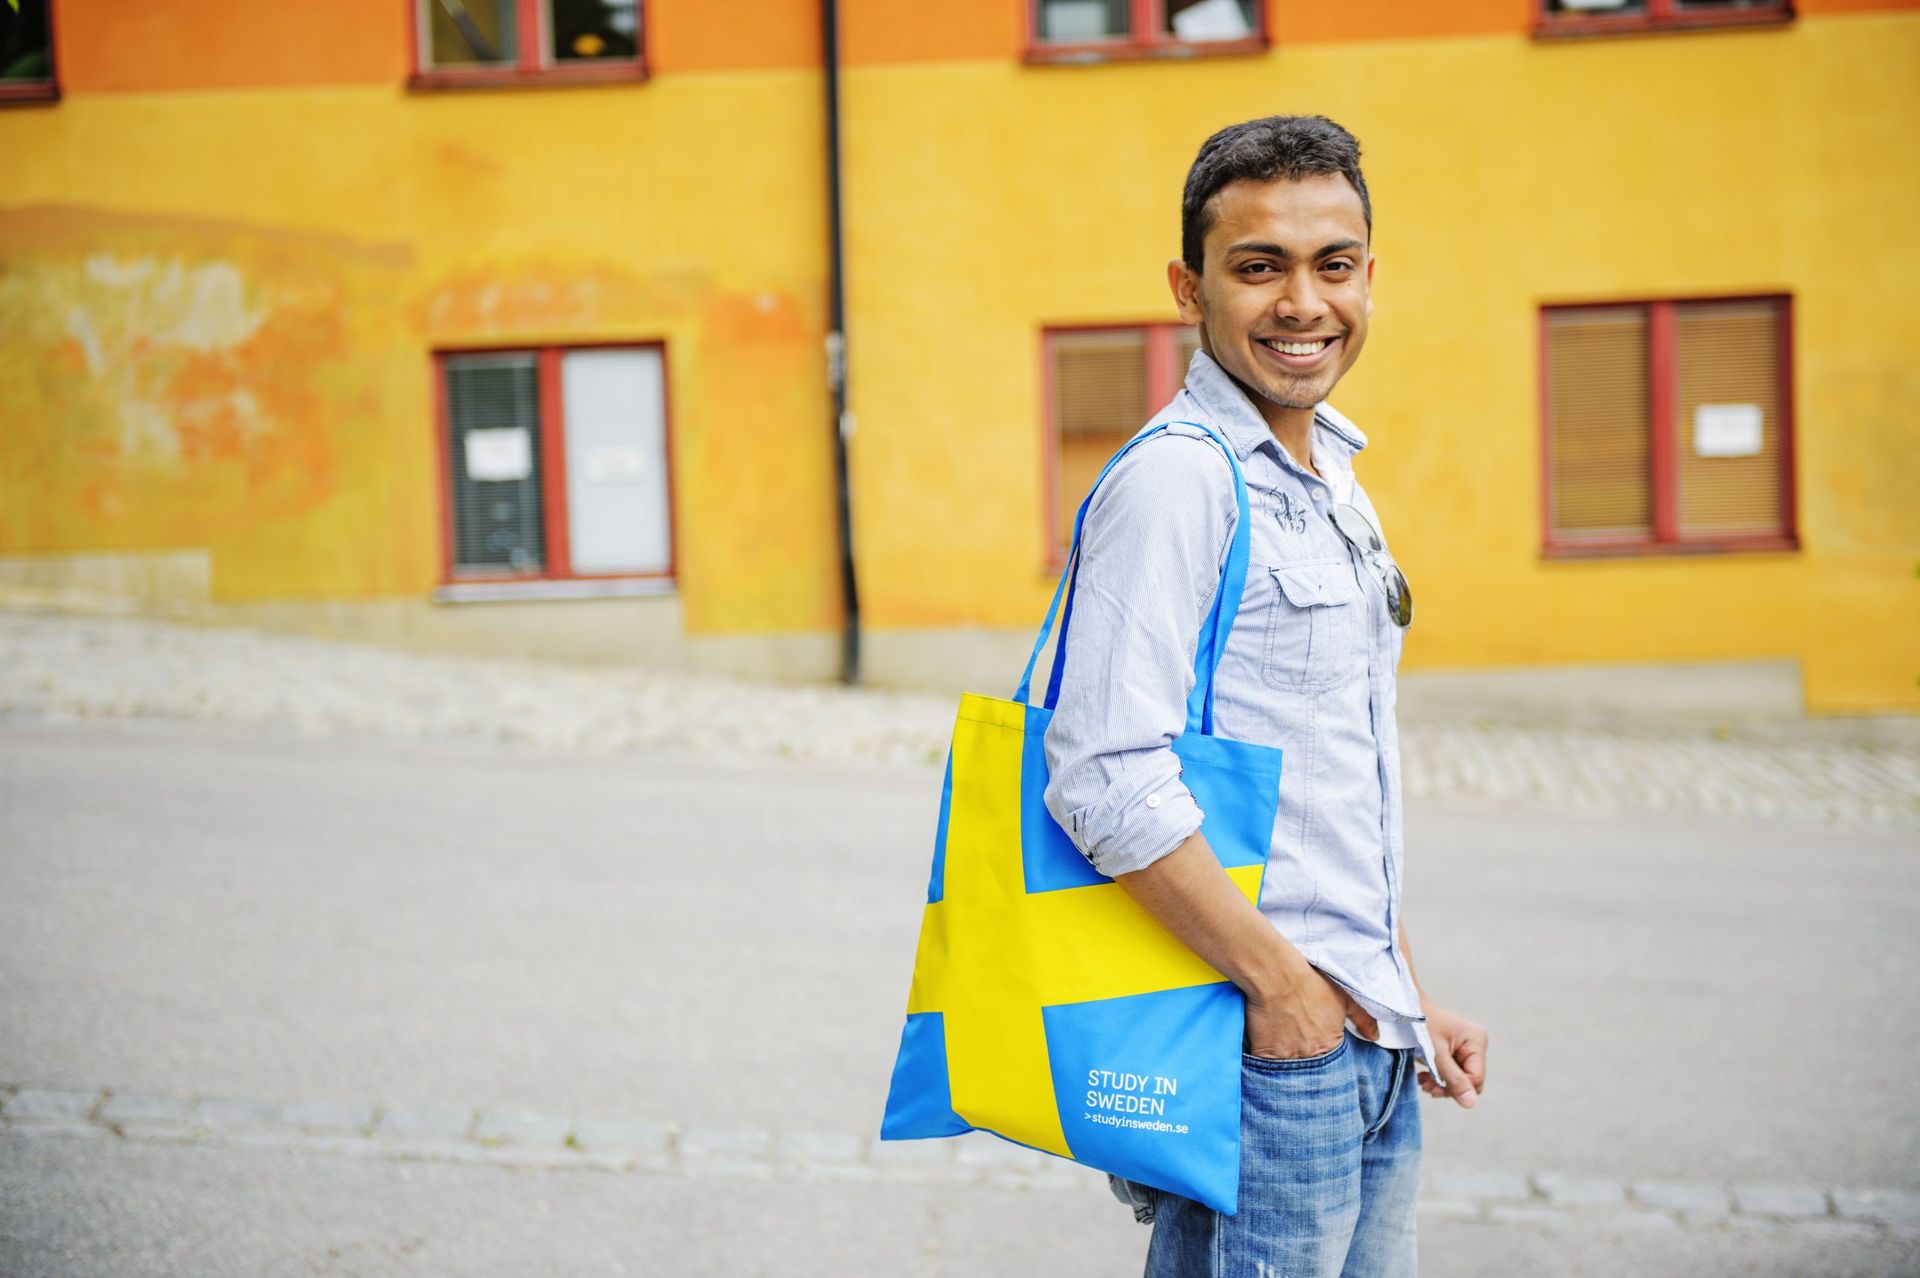 Student posing with study in Sweden bag